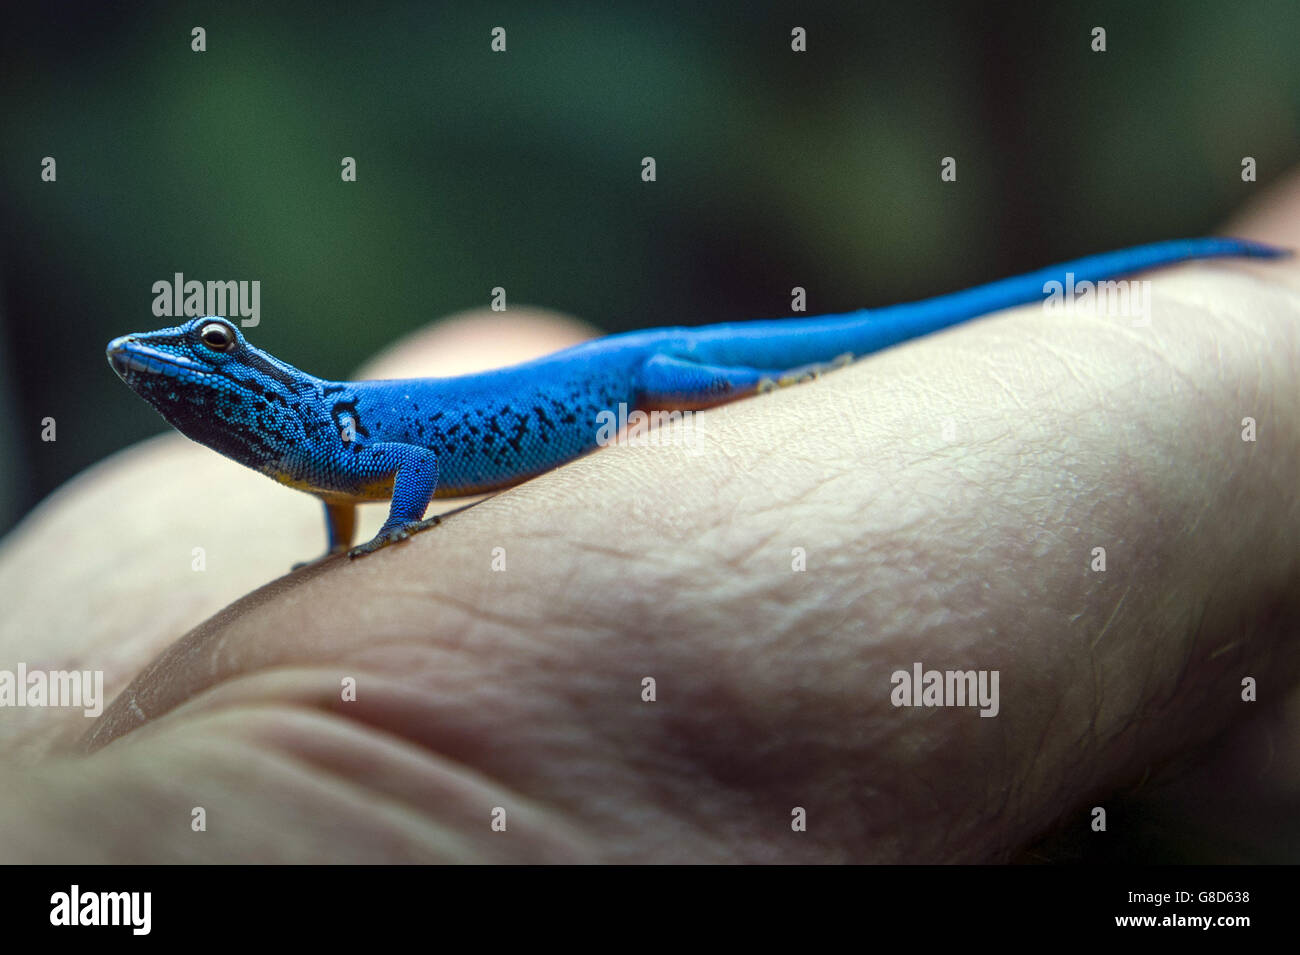 A critically endangered electric blue gecko sits on a keepers hand at Bristol Zoo, where one of around 165 of the rare breeds have been rescued and re-homed after they were smuggled into the country via Heathrow airport from Tanzania, believed to be destined for the pet trade. Stock Photo